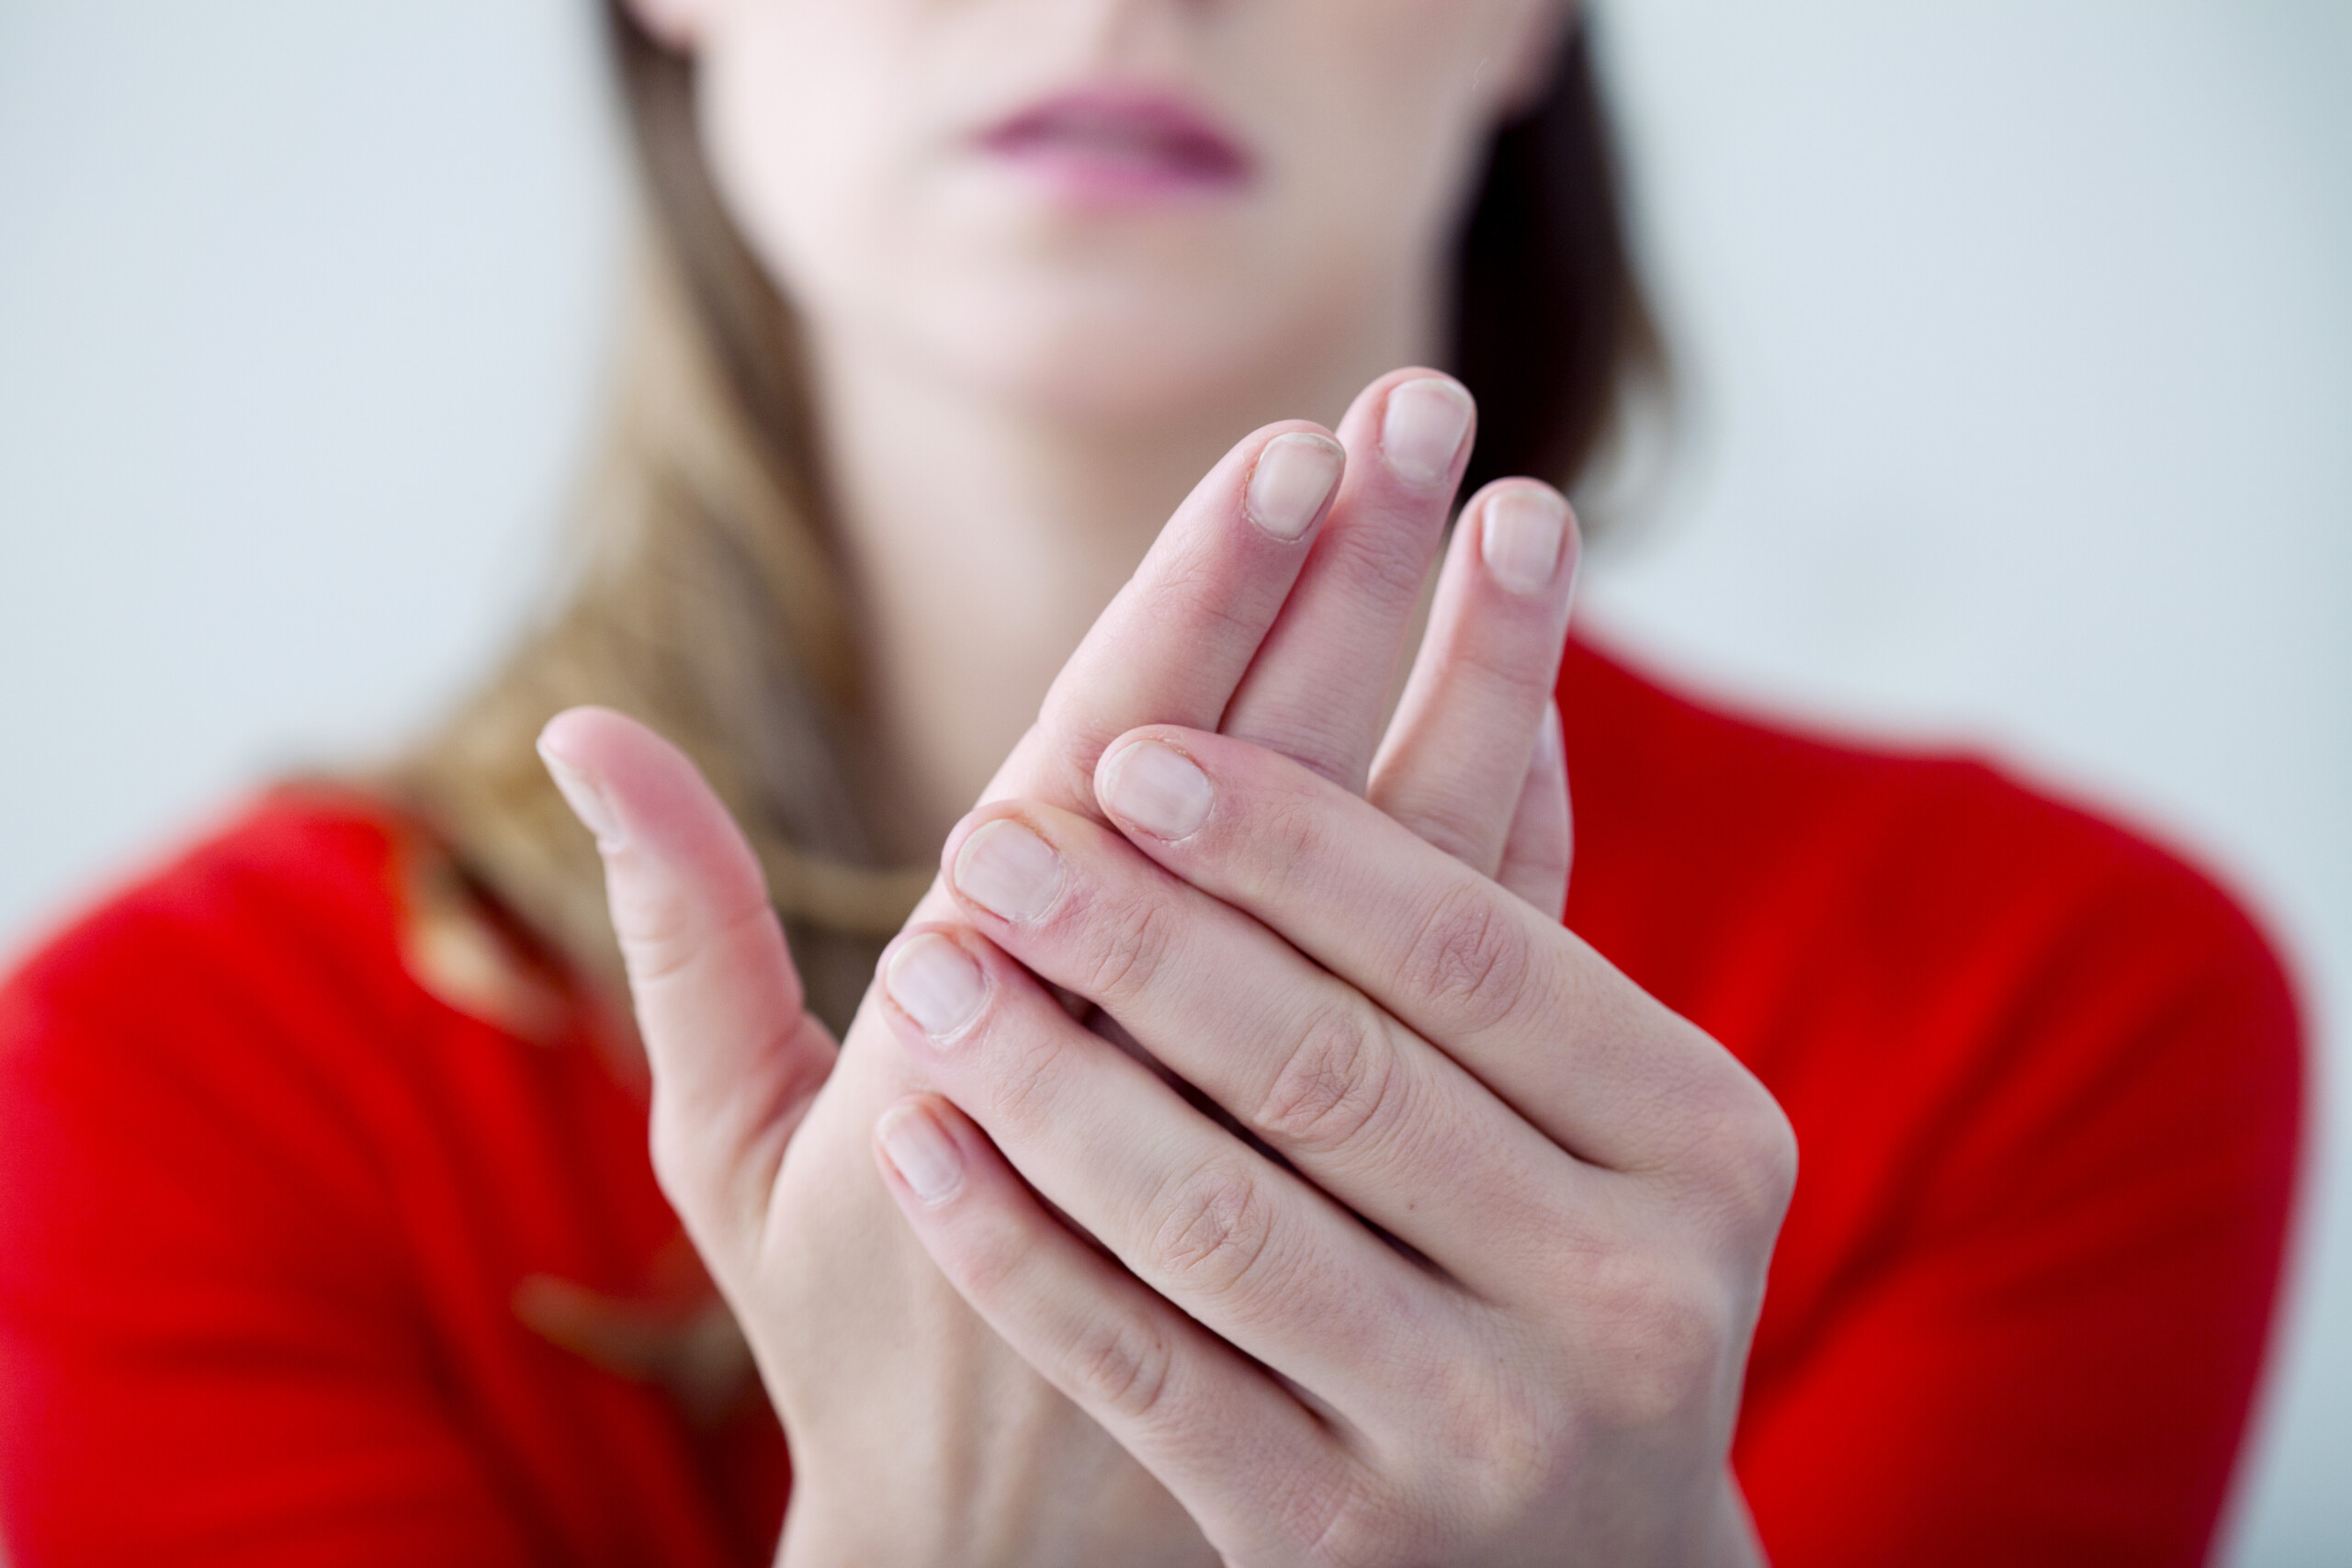 Why Does Stress Cause Cold Hands?